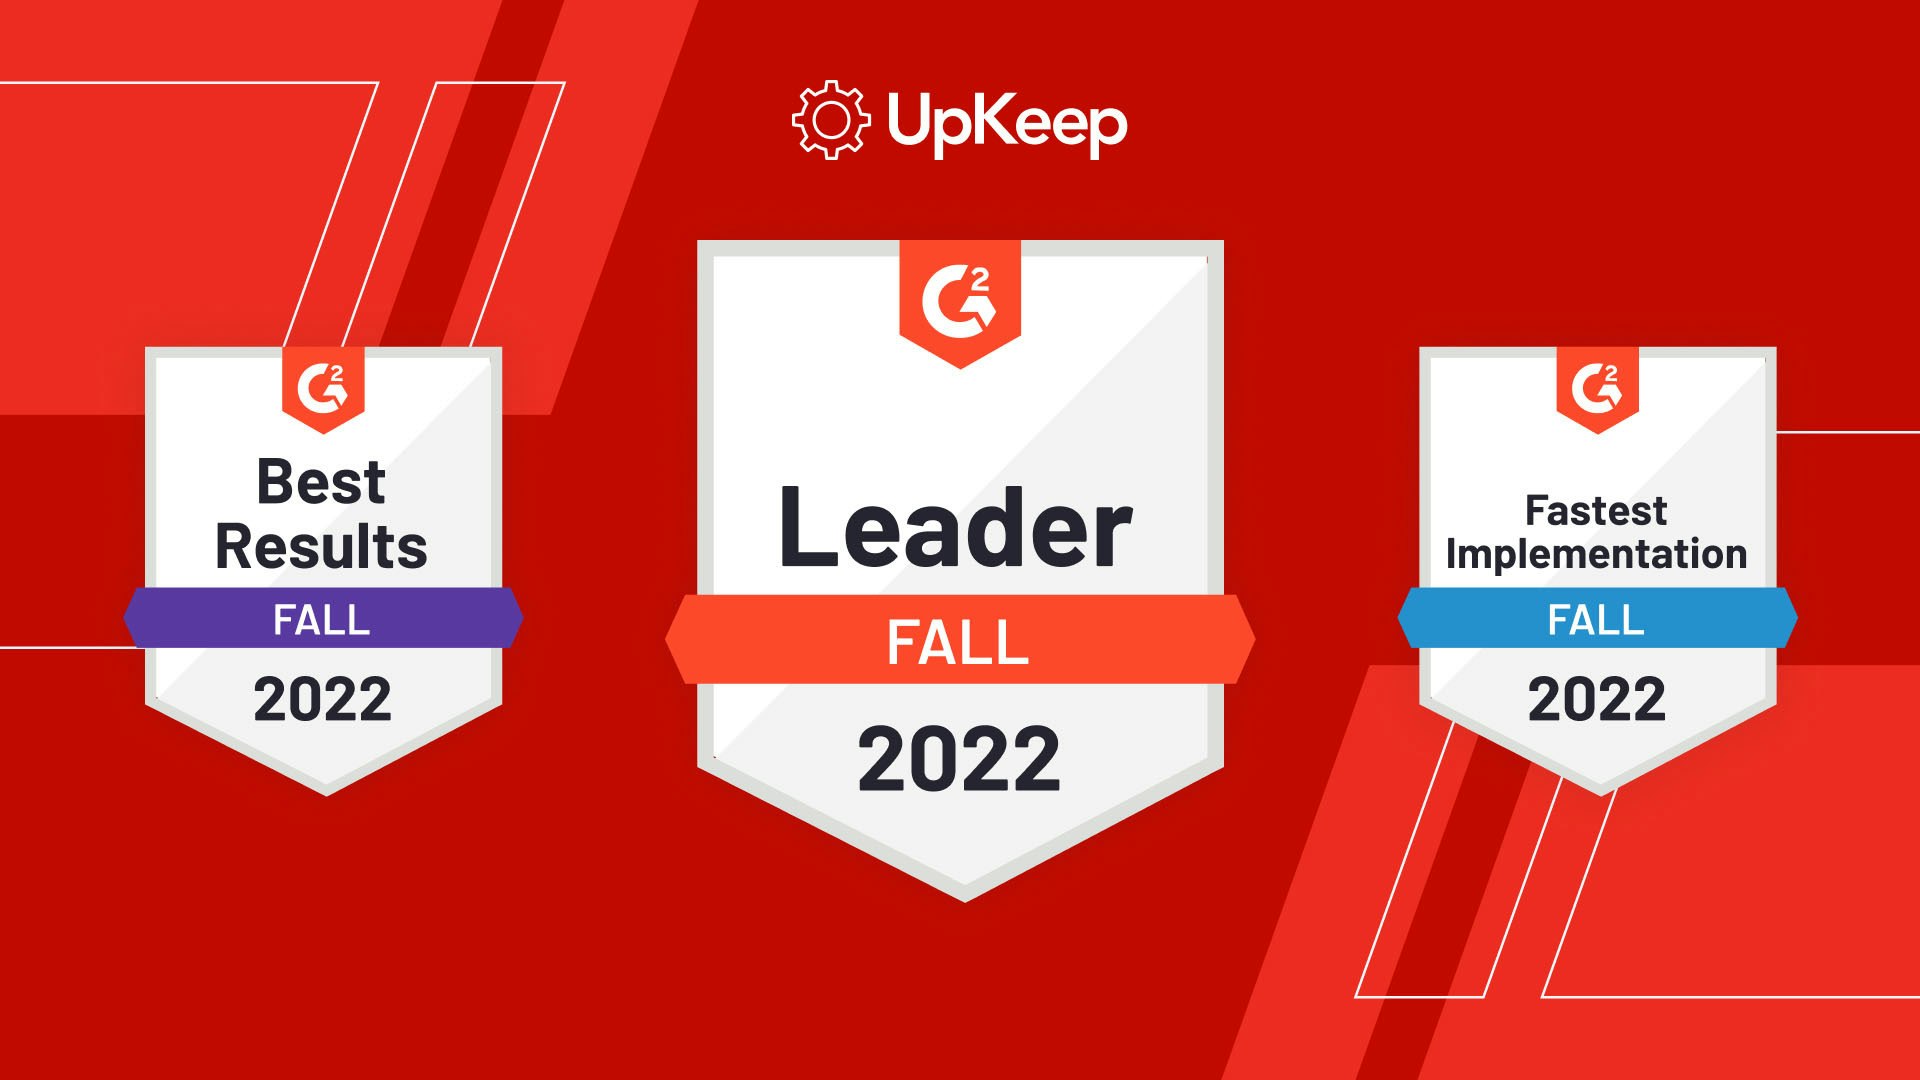 UpKeep Leads the Way in G2 Fall 2022 Reports